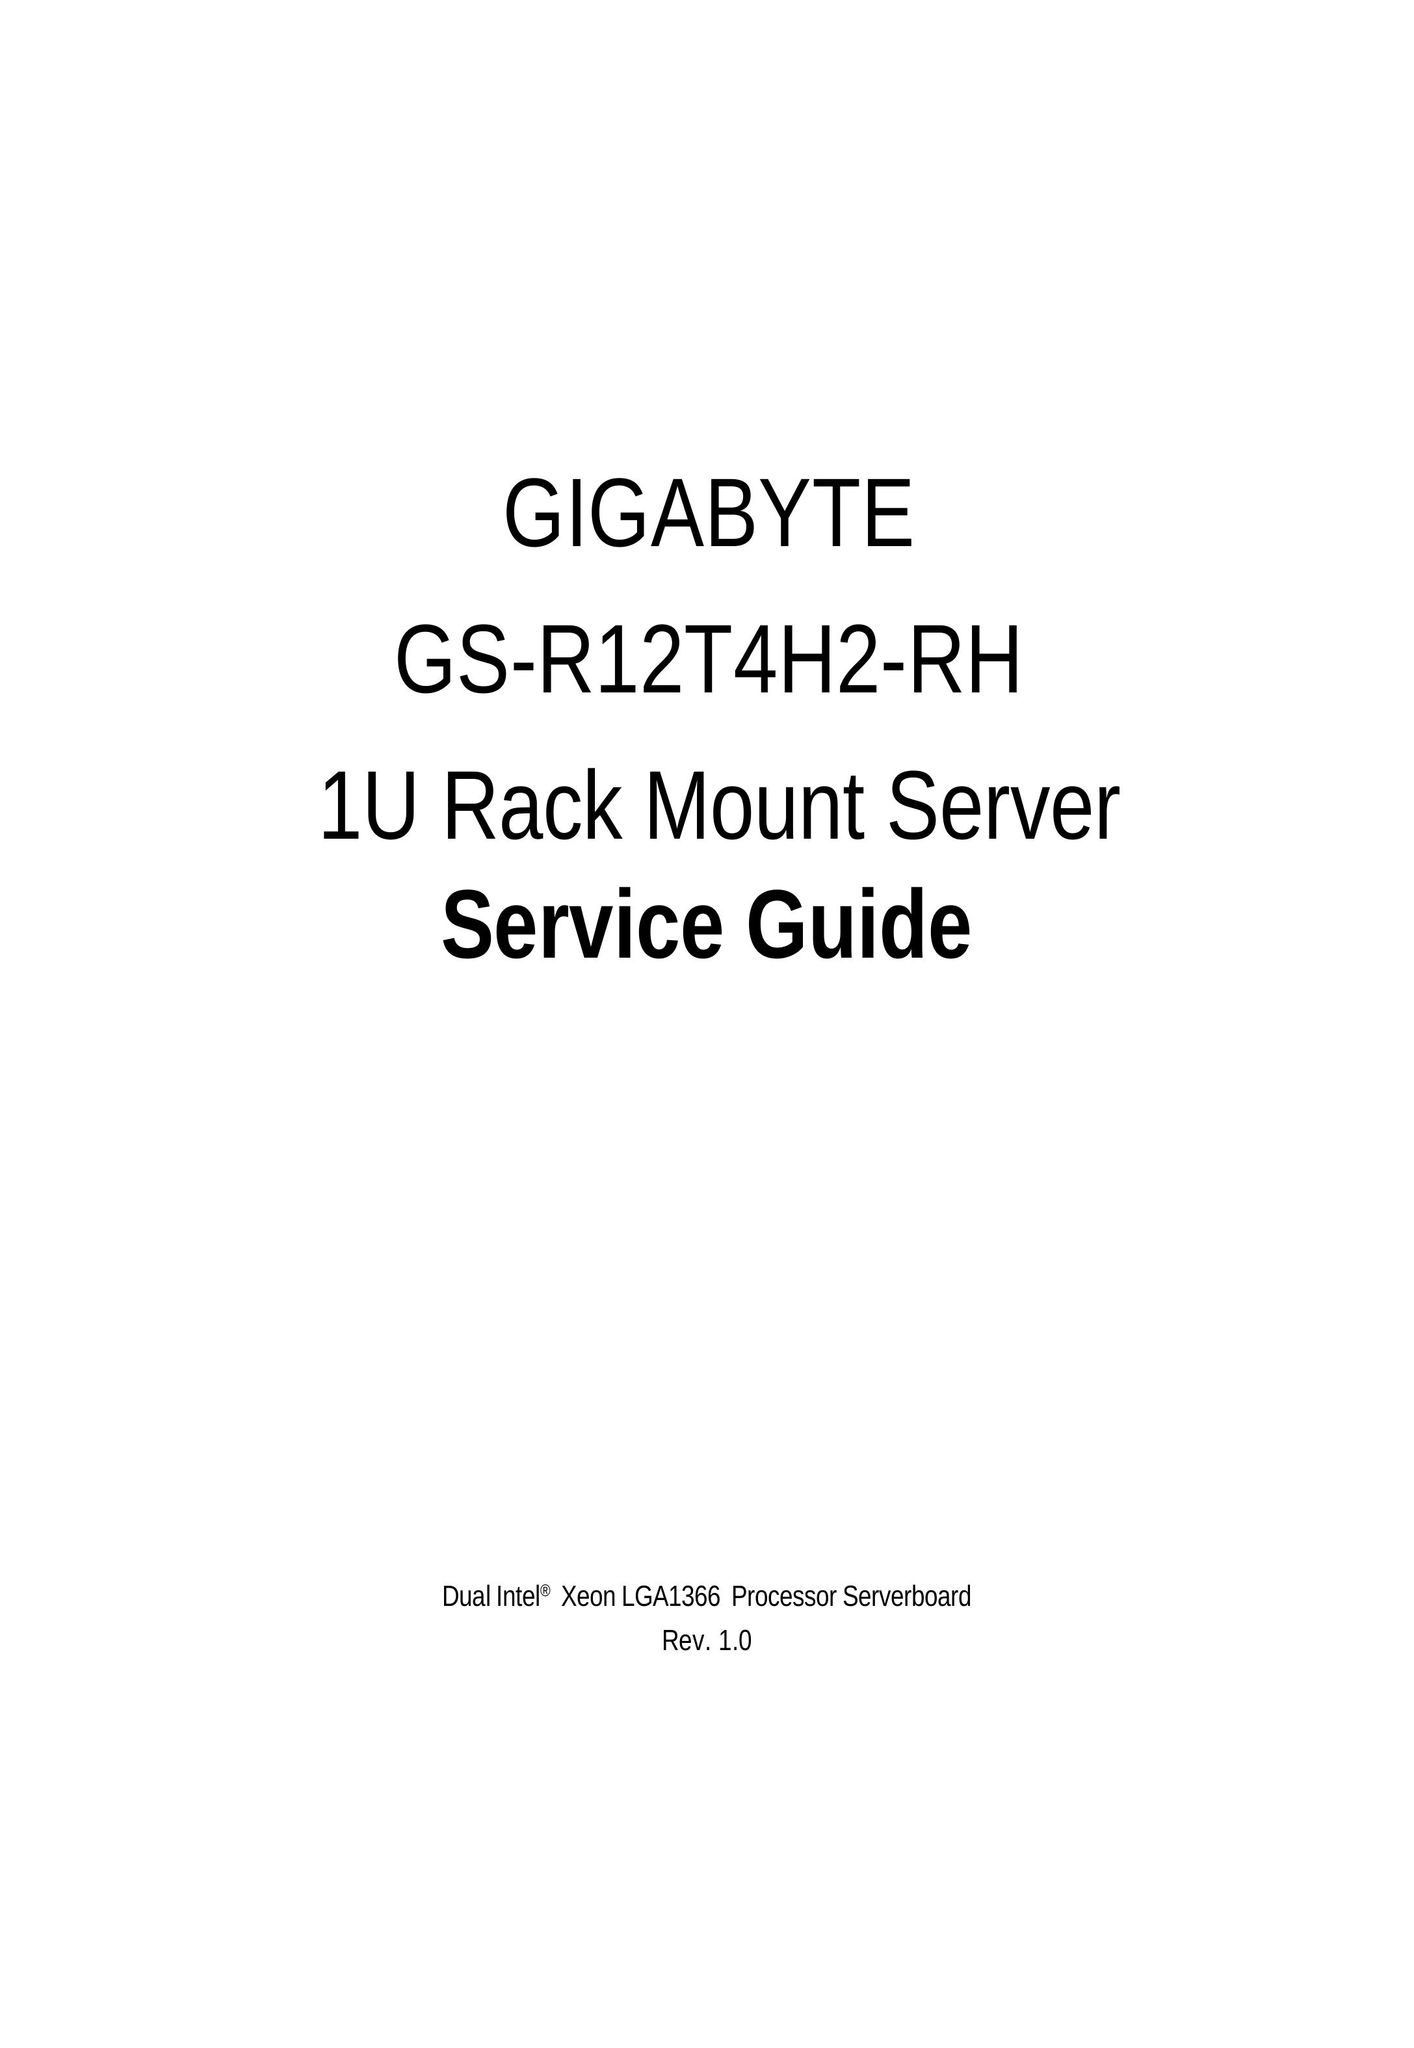 Gigabyte GS-R12T4H2-RH Personal Computer User Manual